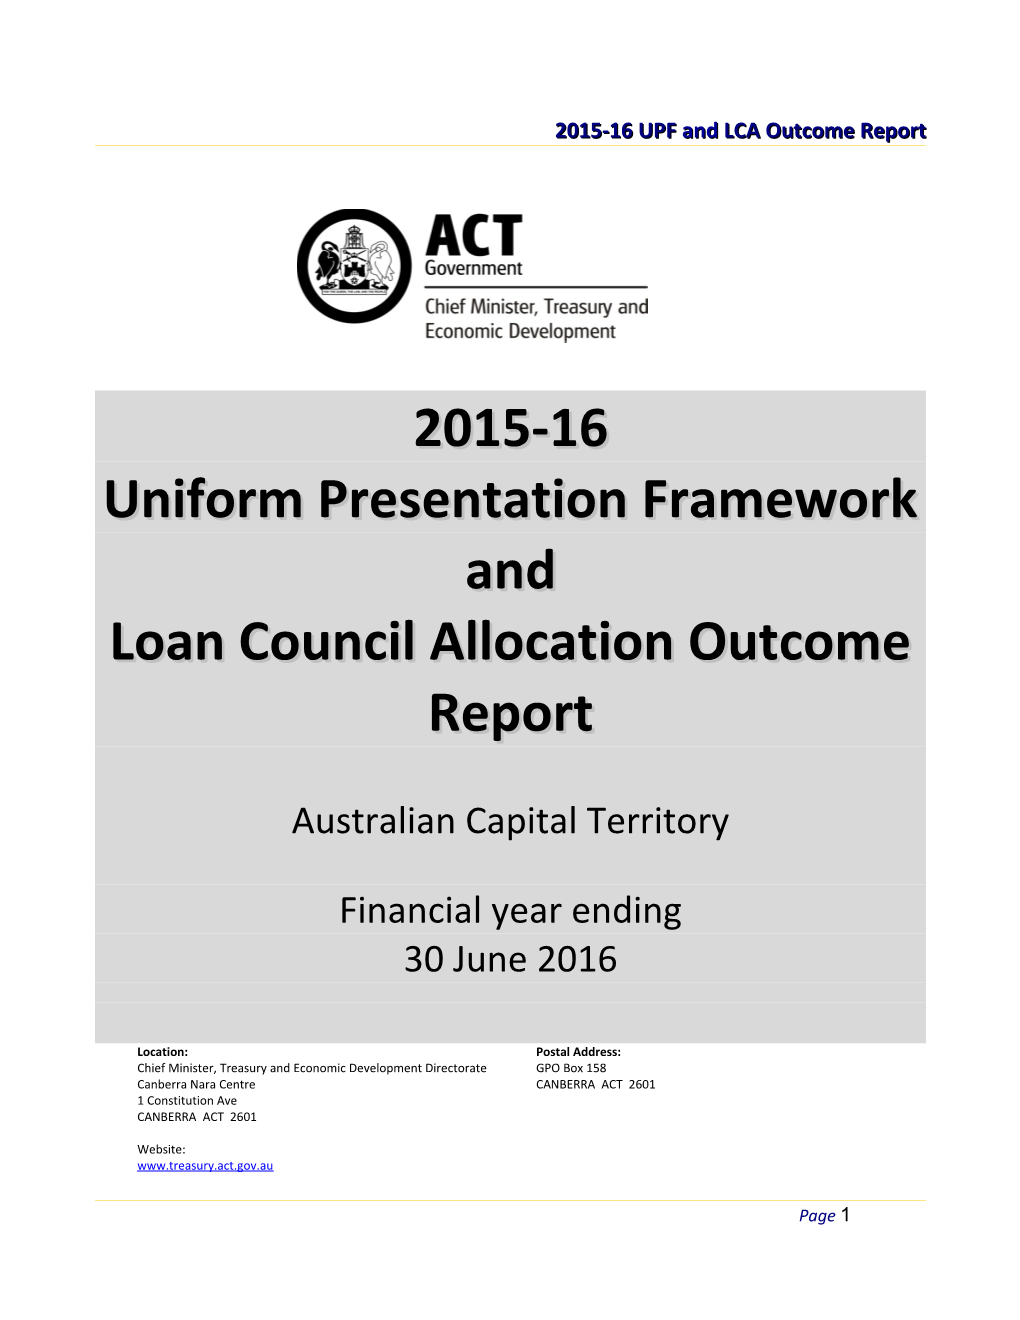 ACT Government: 2015-16 Uniform Presentation Framework and Loan Council Allocation Outcome